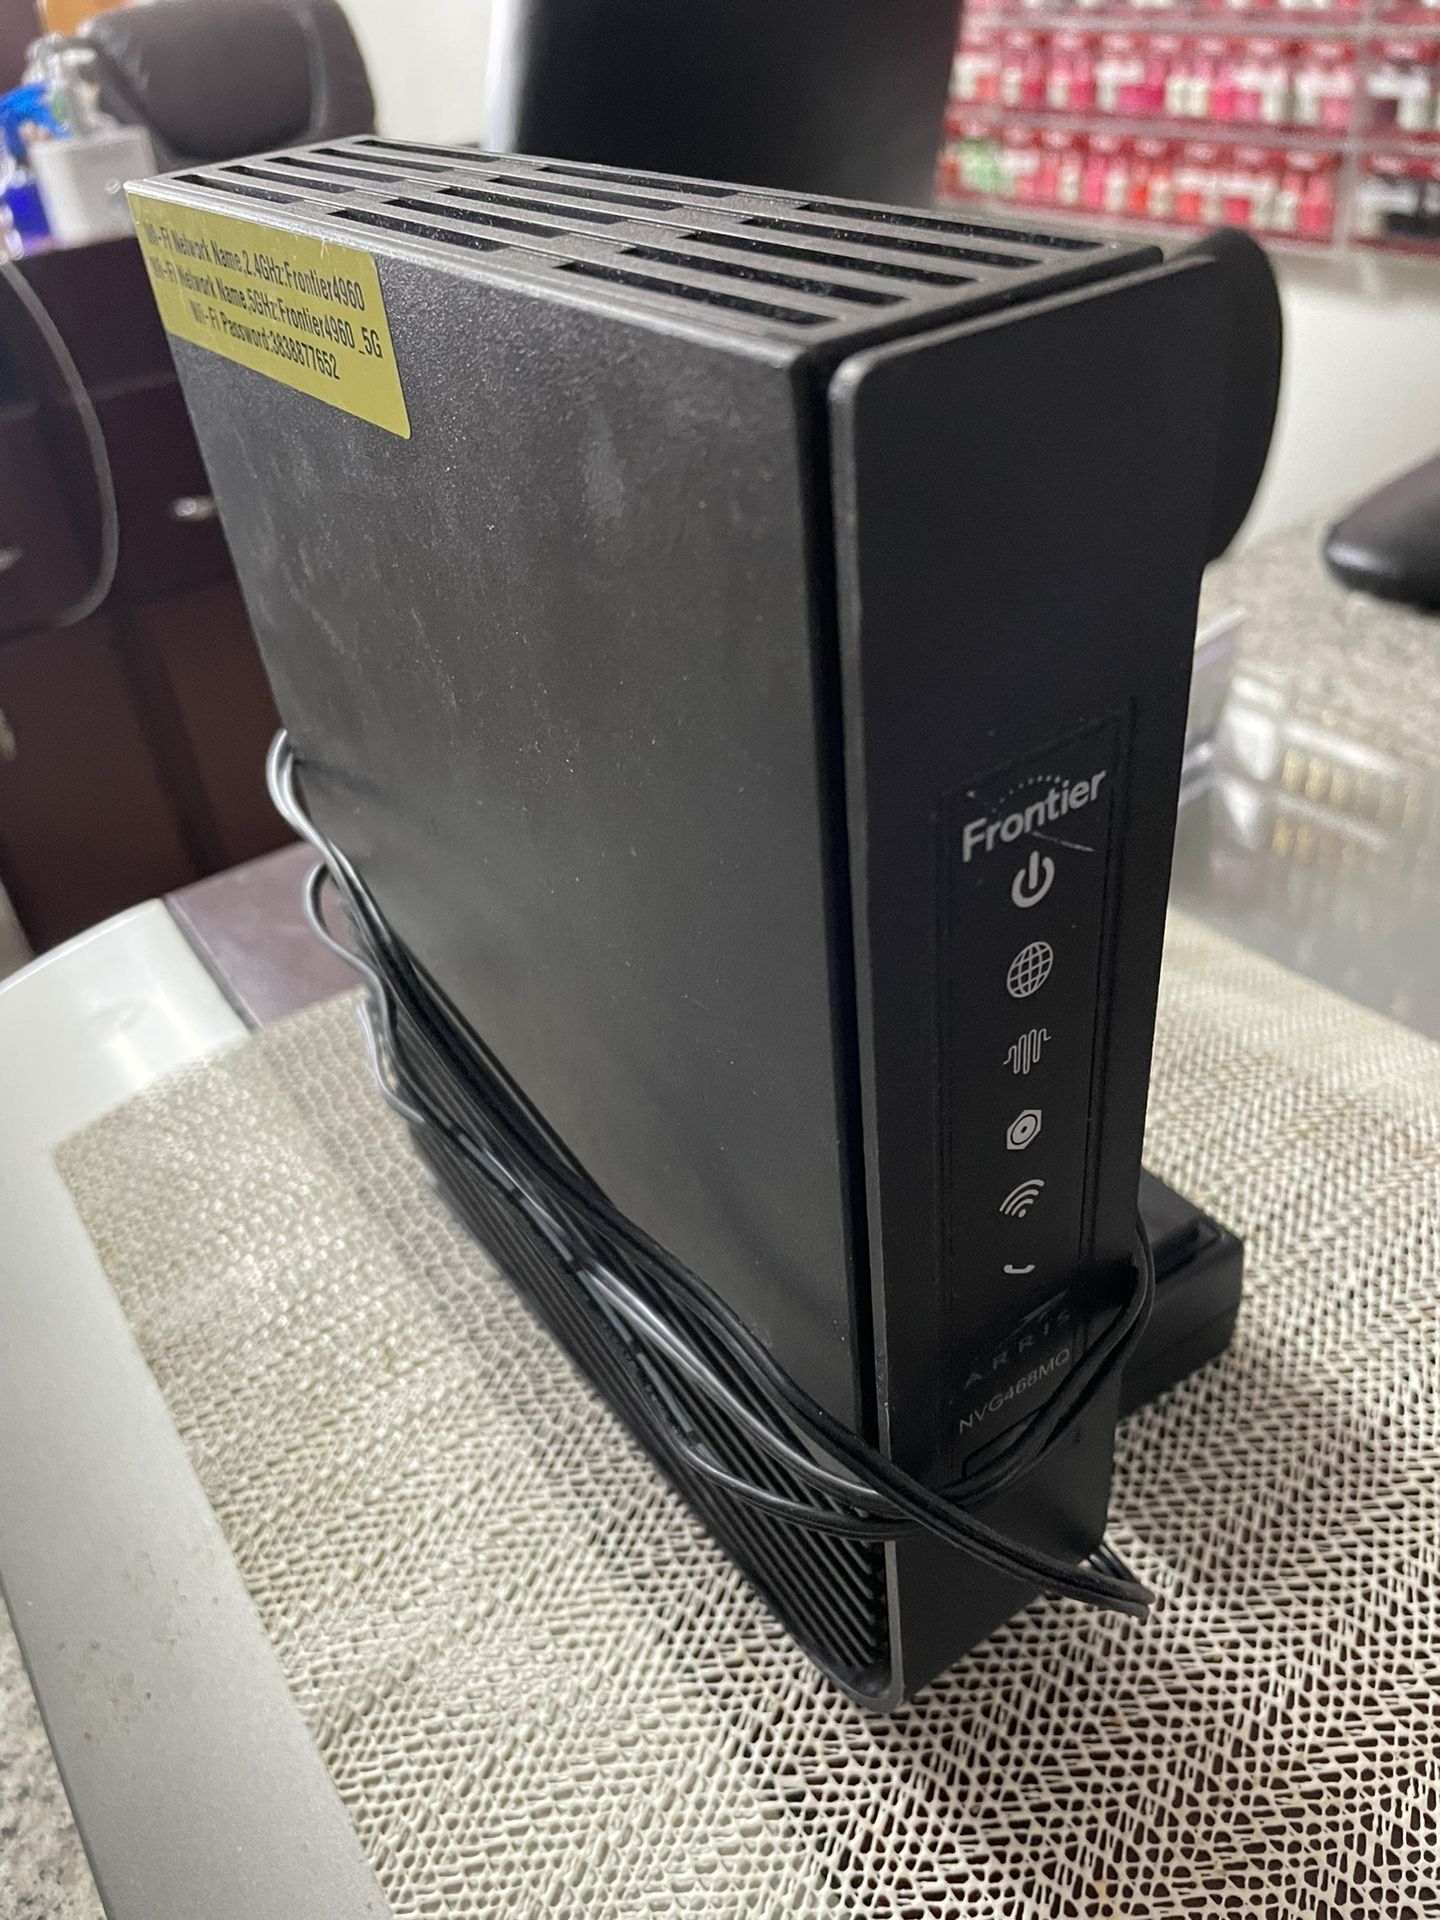 Frontier Modem And Router 